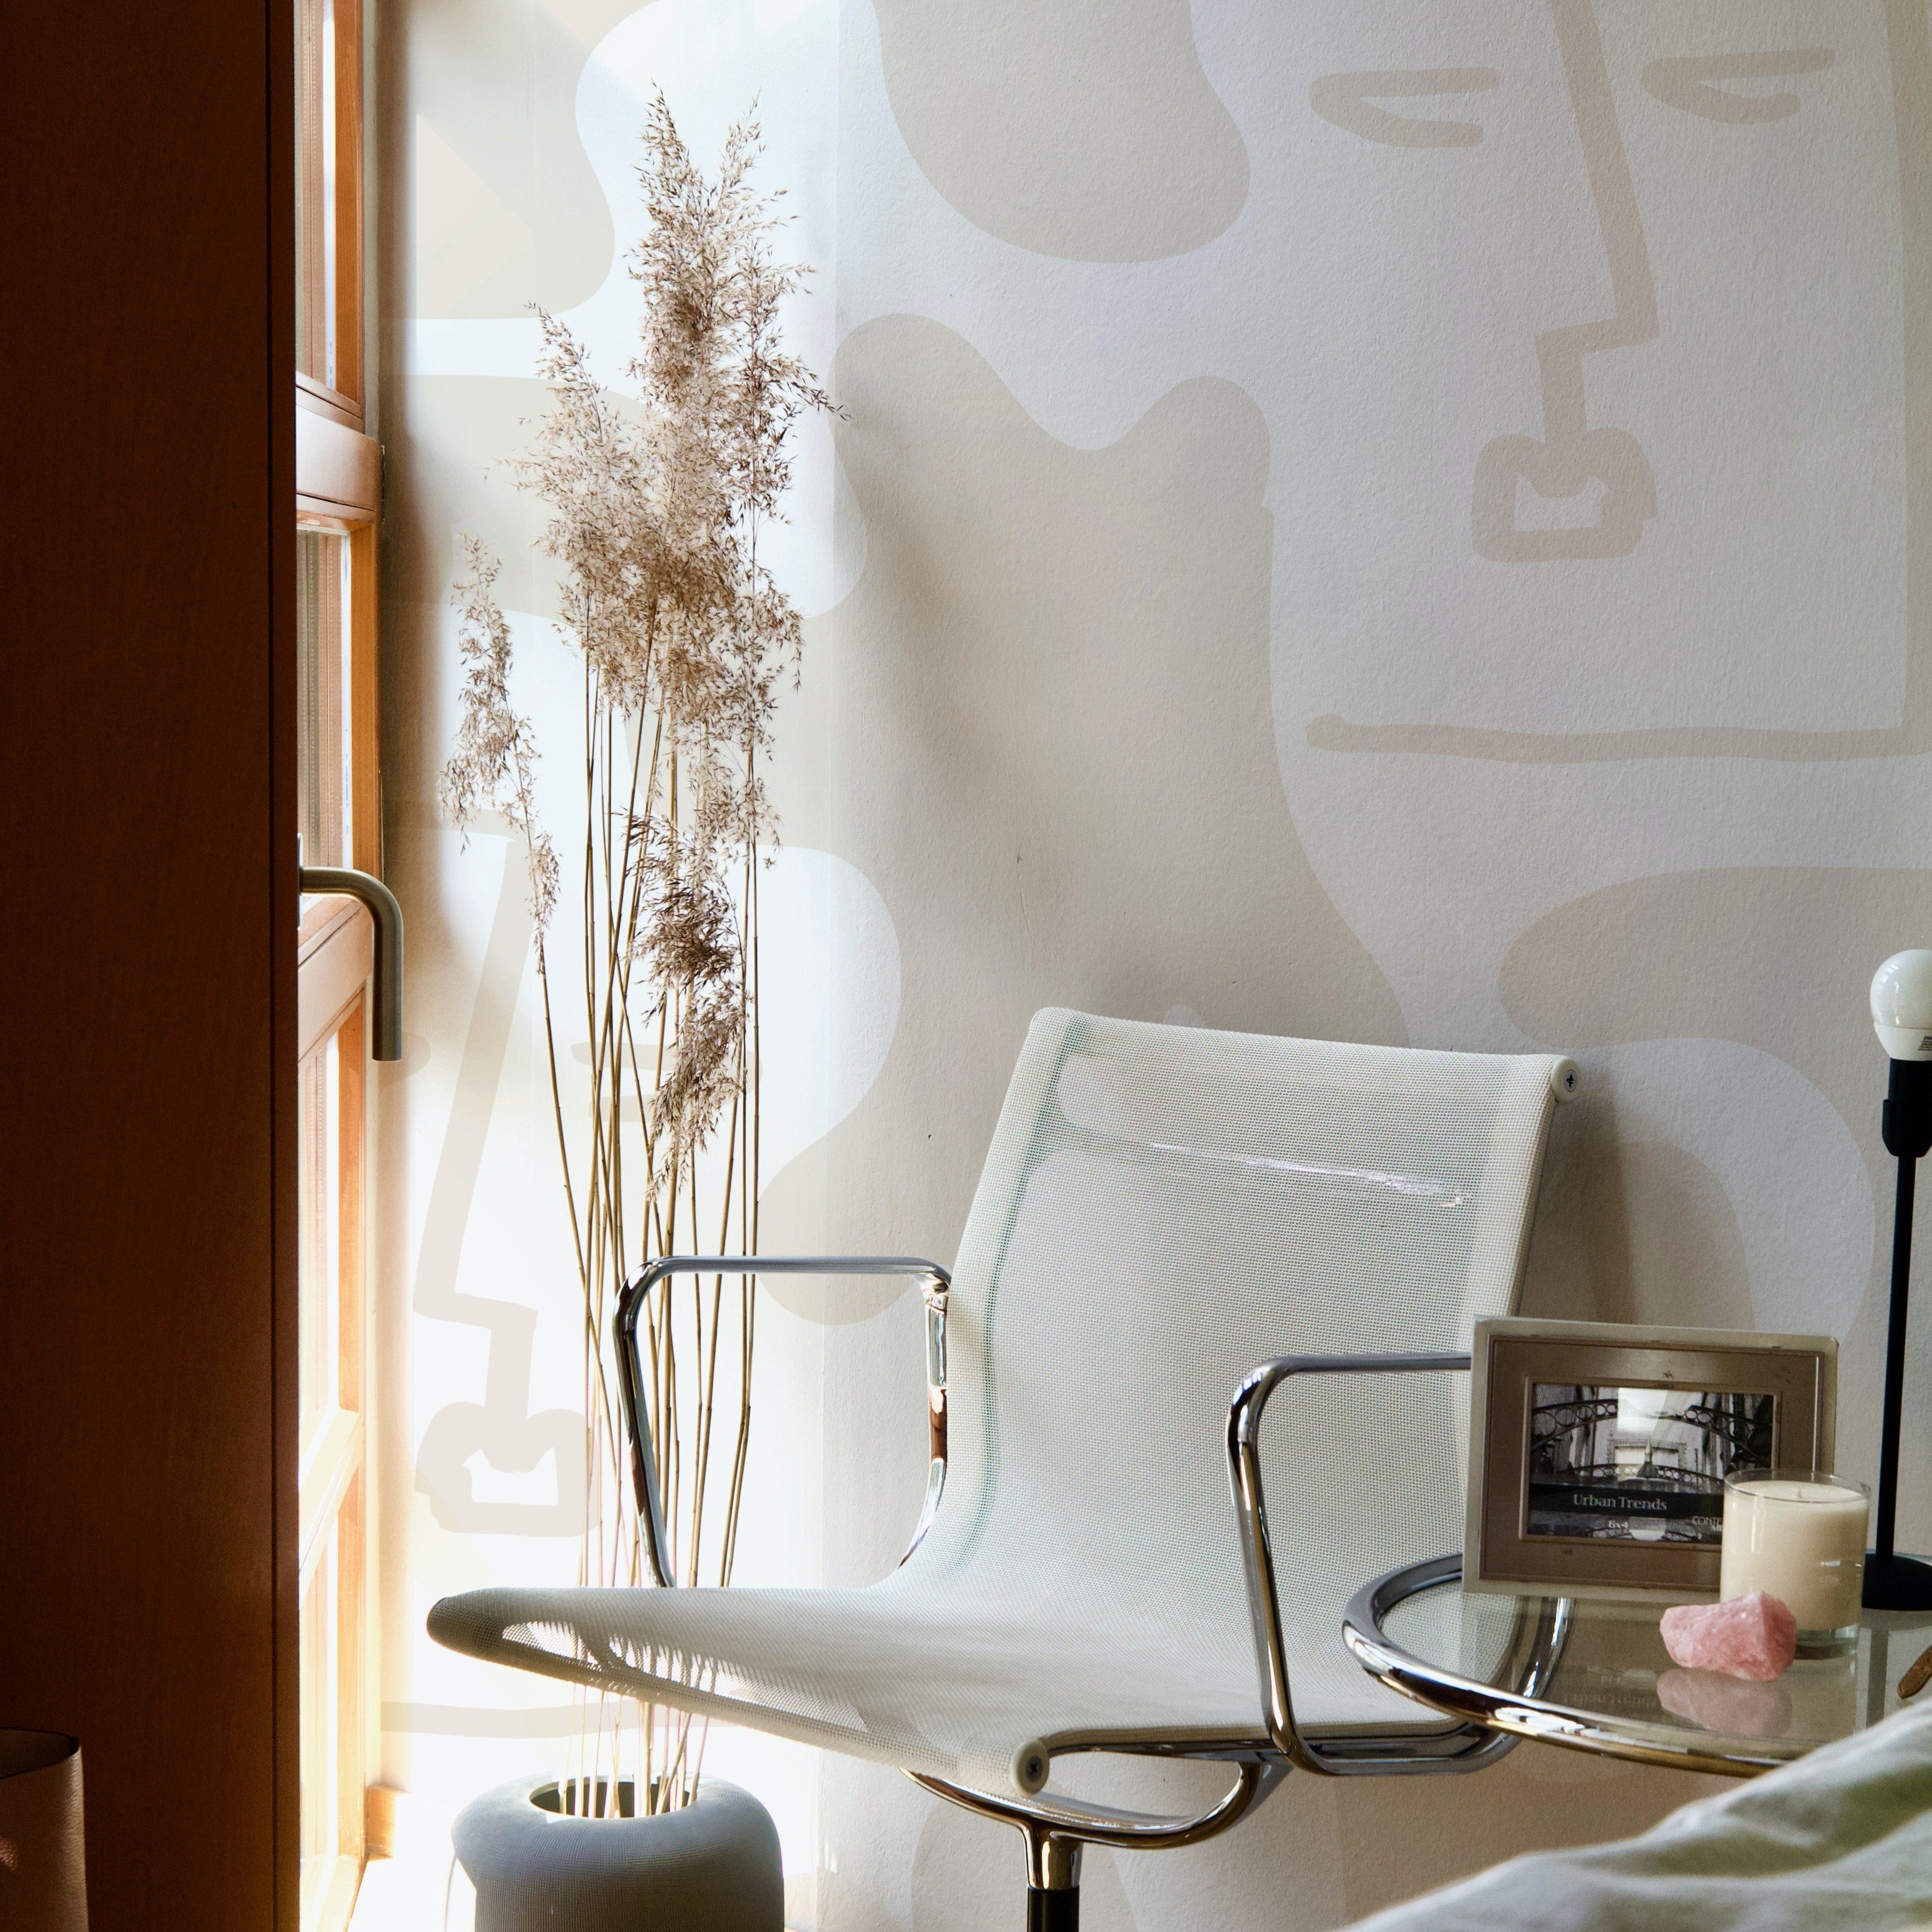 Minimalist Boho Wallpaper featuring abstract linear faces and organic shapes in neutral beige tones, creating a serene and stylish backdrop in a sunlit corner with a modern chair, glass table, and dried plants.